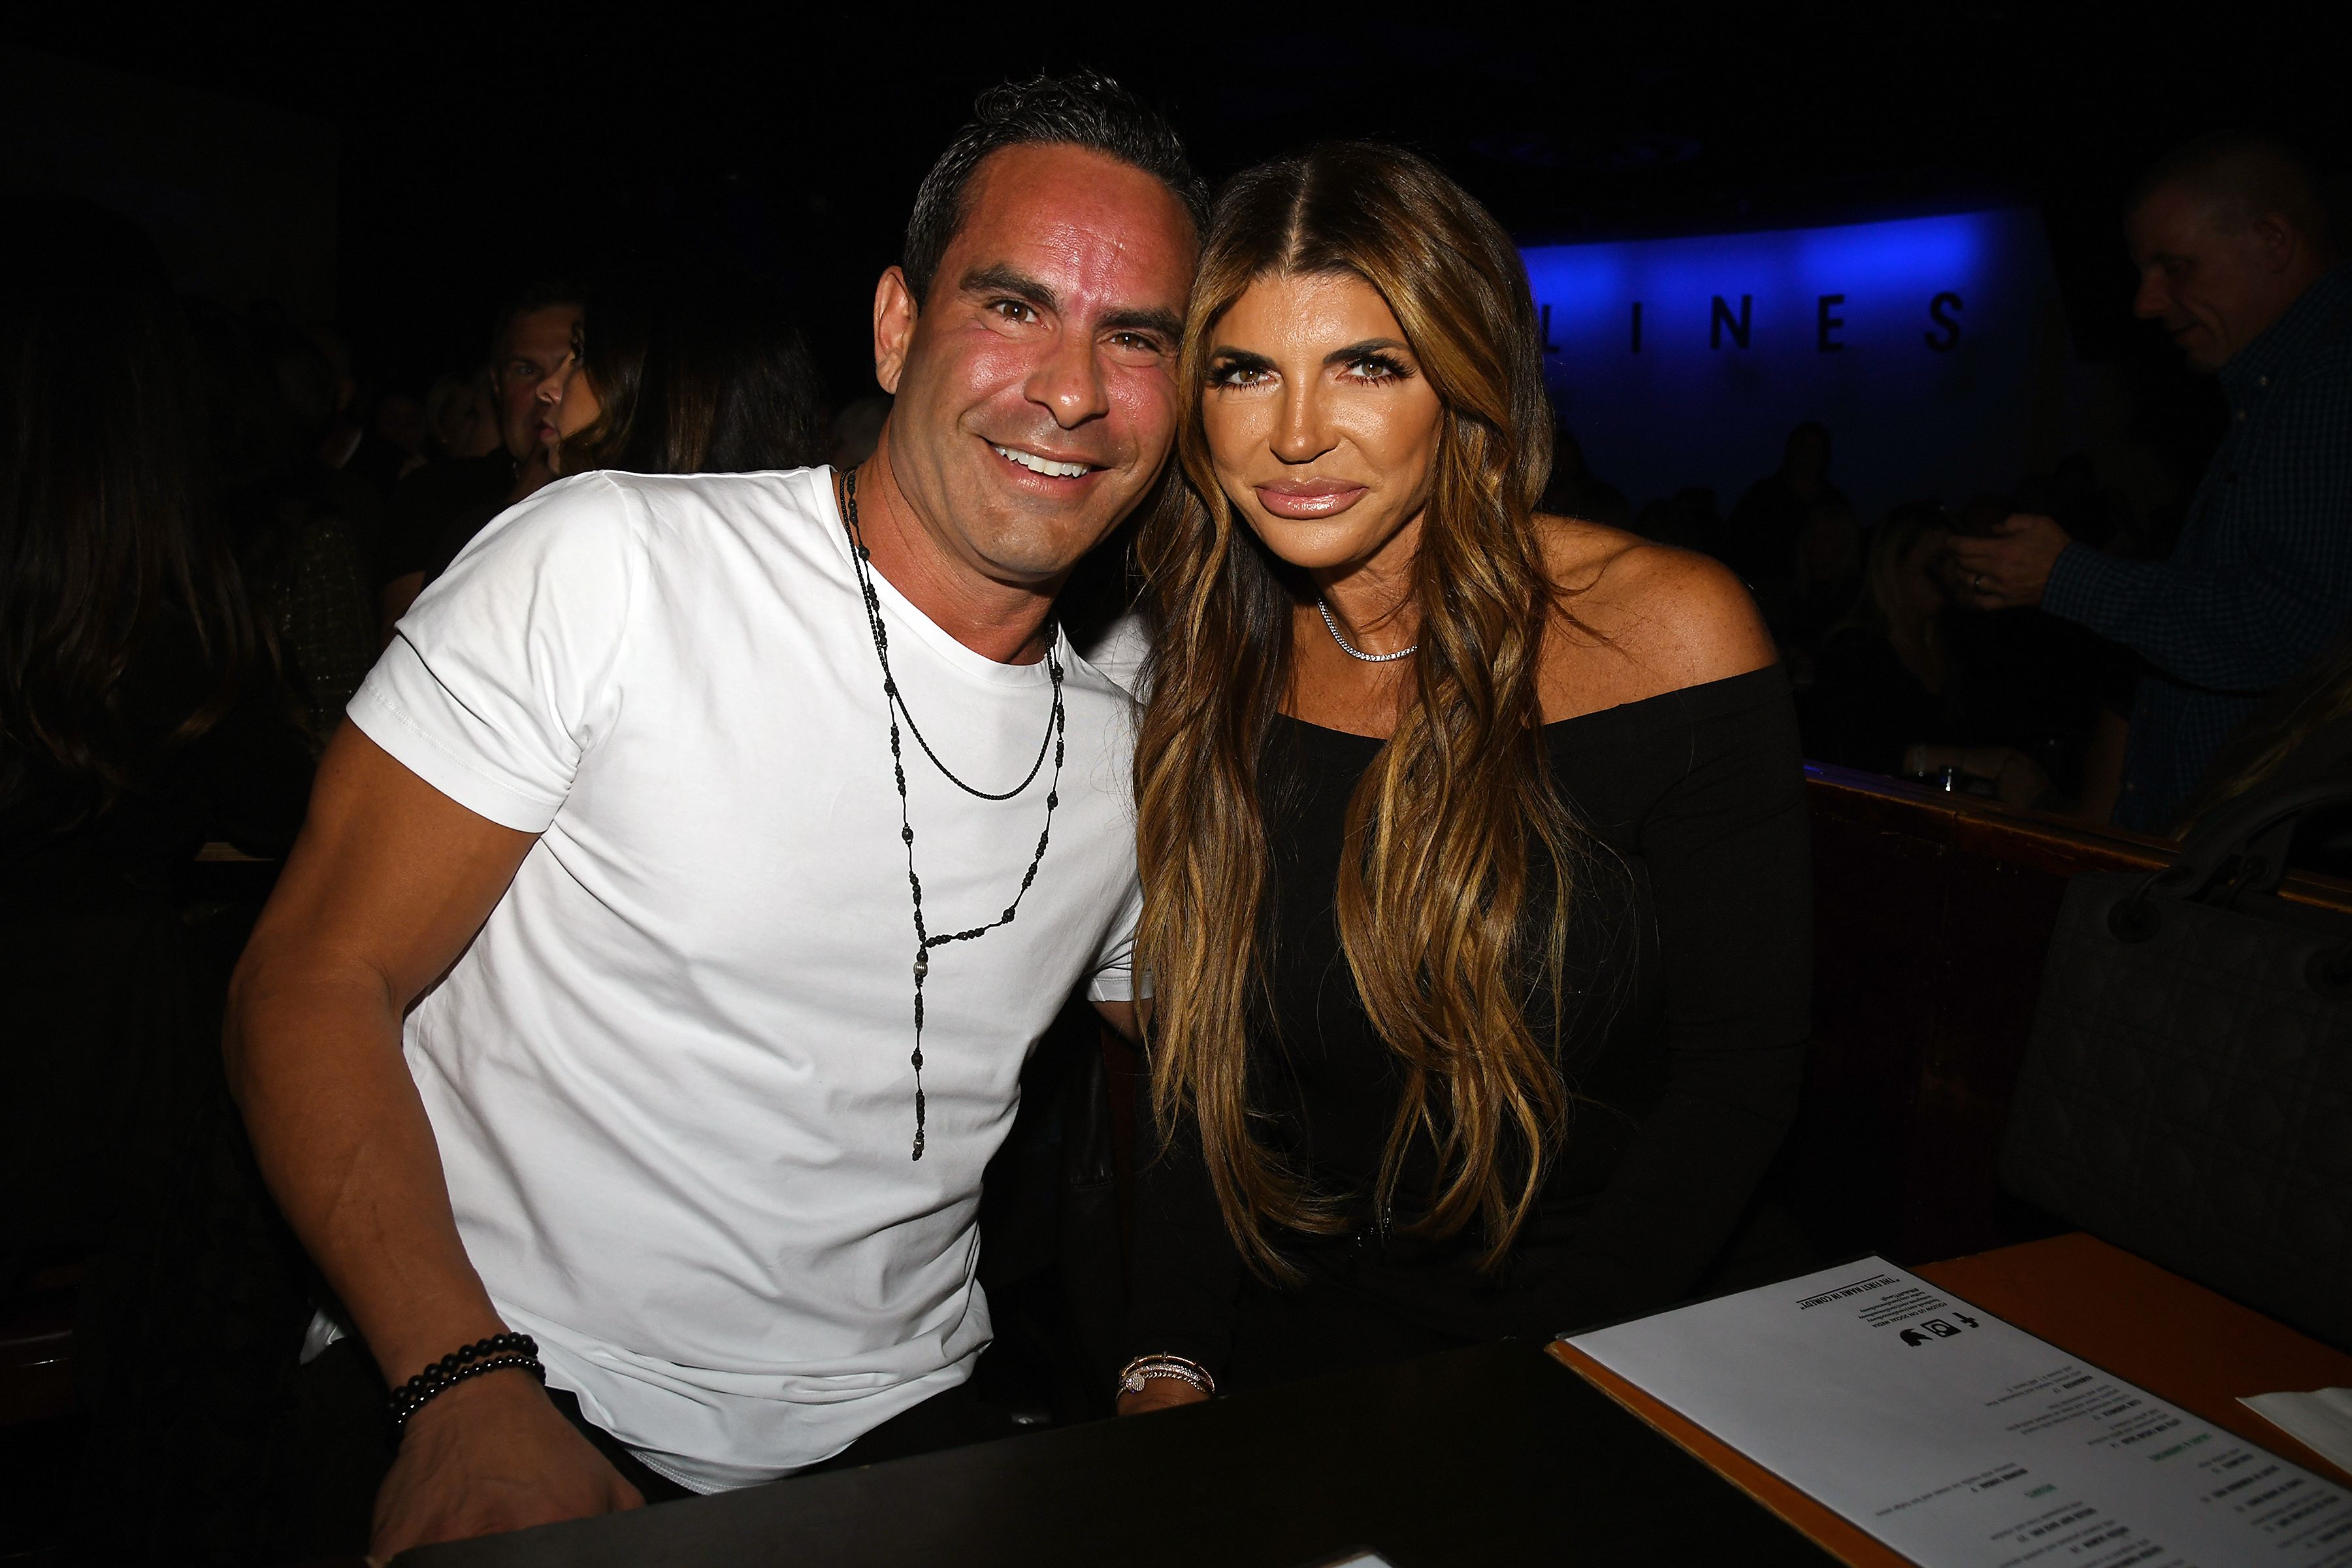 RHONJ's Louie Ruelas' Ups and Downs Over the Years